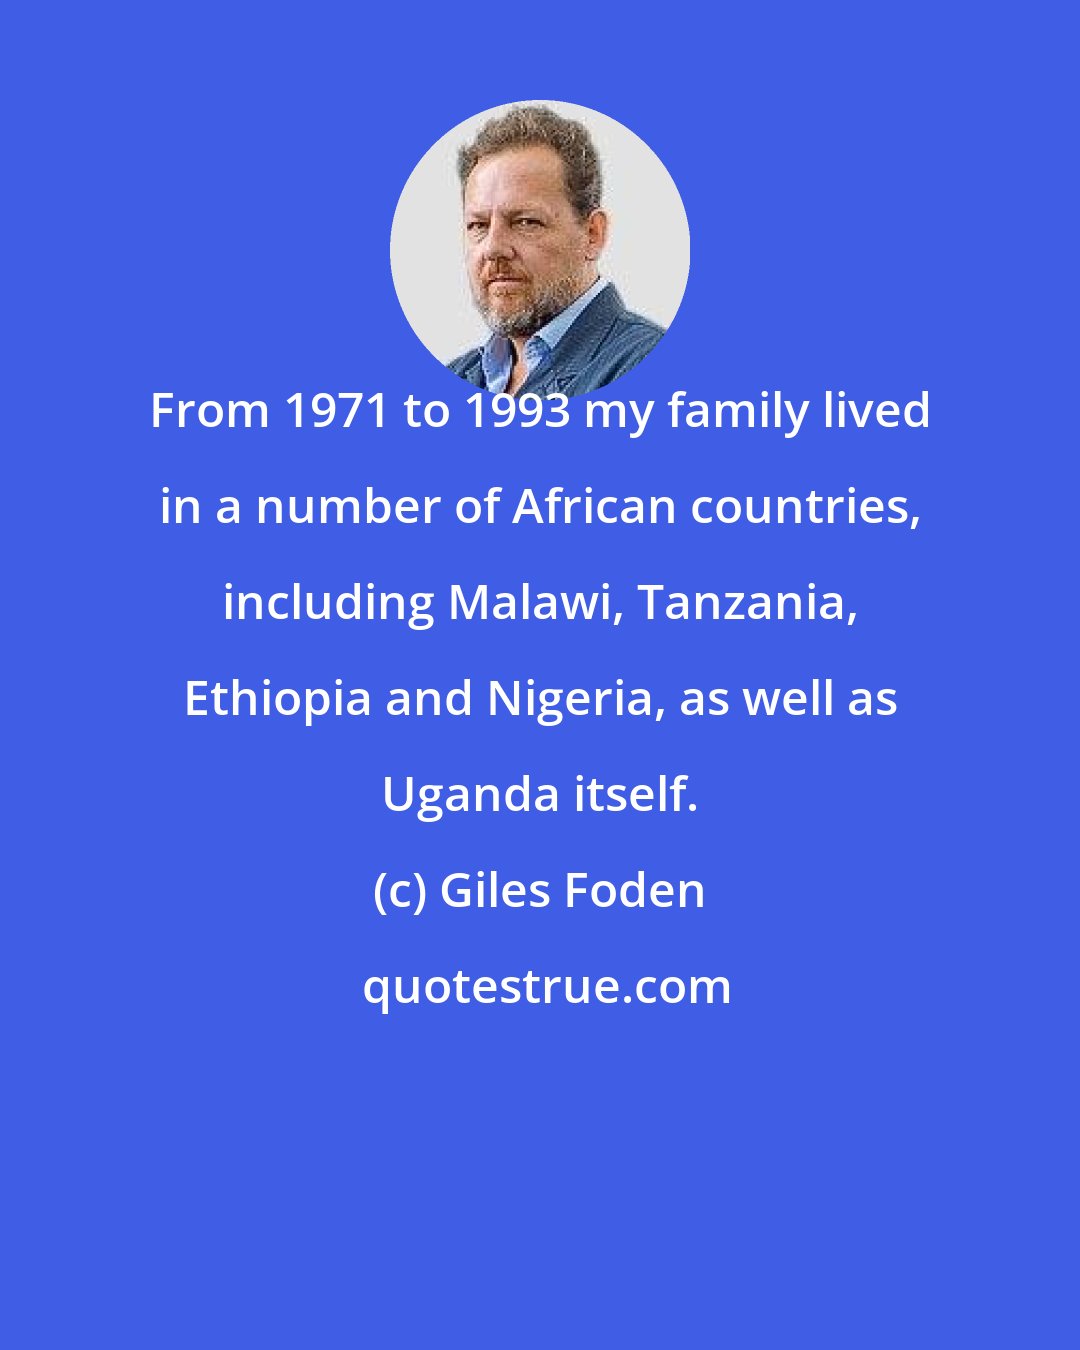 Giles Foden: From 1971 to 1993 my family lived in a number of African countries, including Malawi, Tanzania, Ethiopia and Nigeria, as well as Uganda itself.